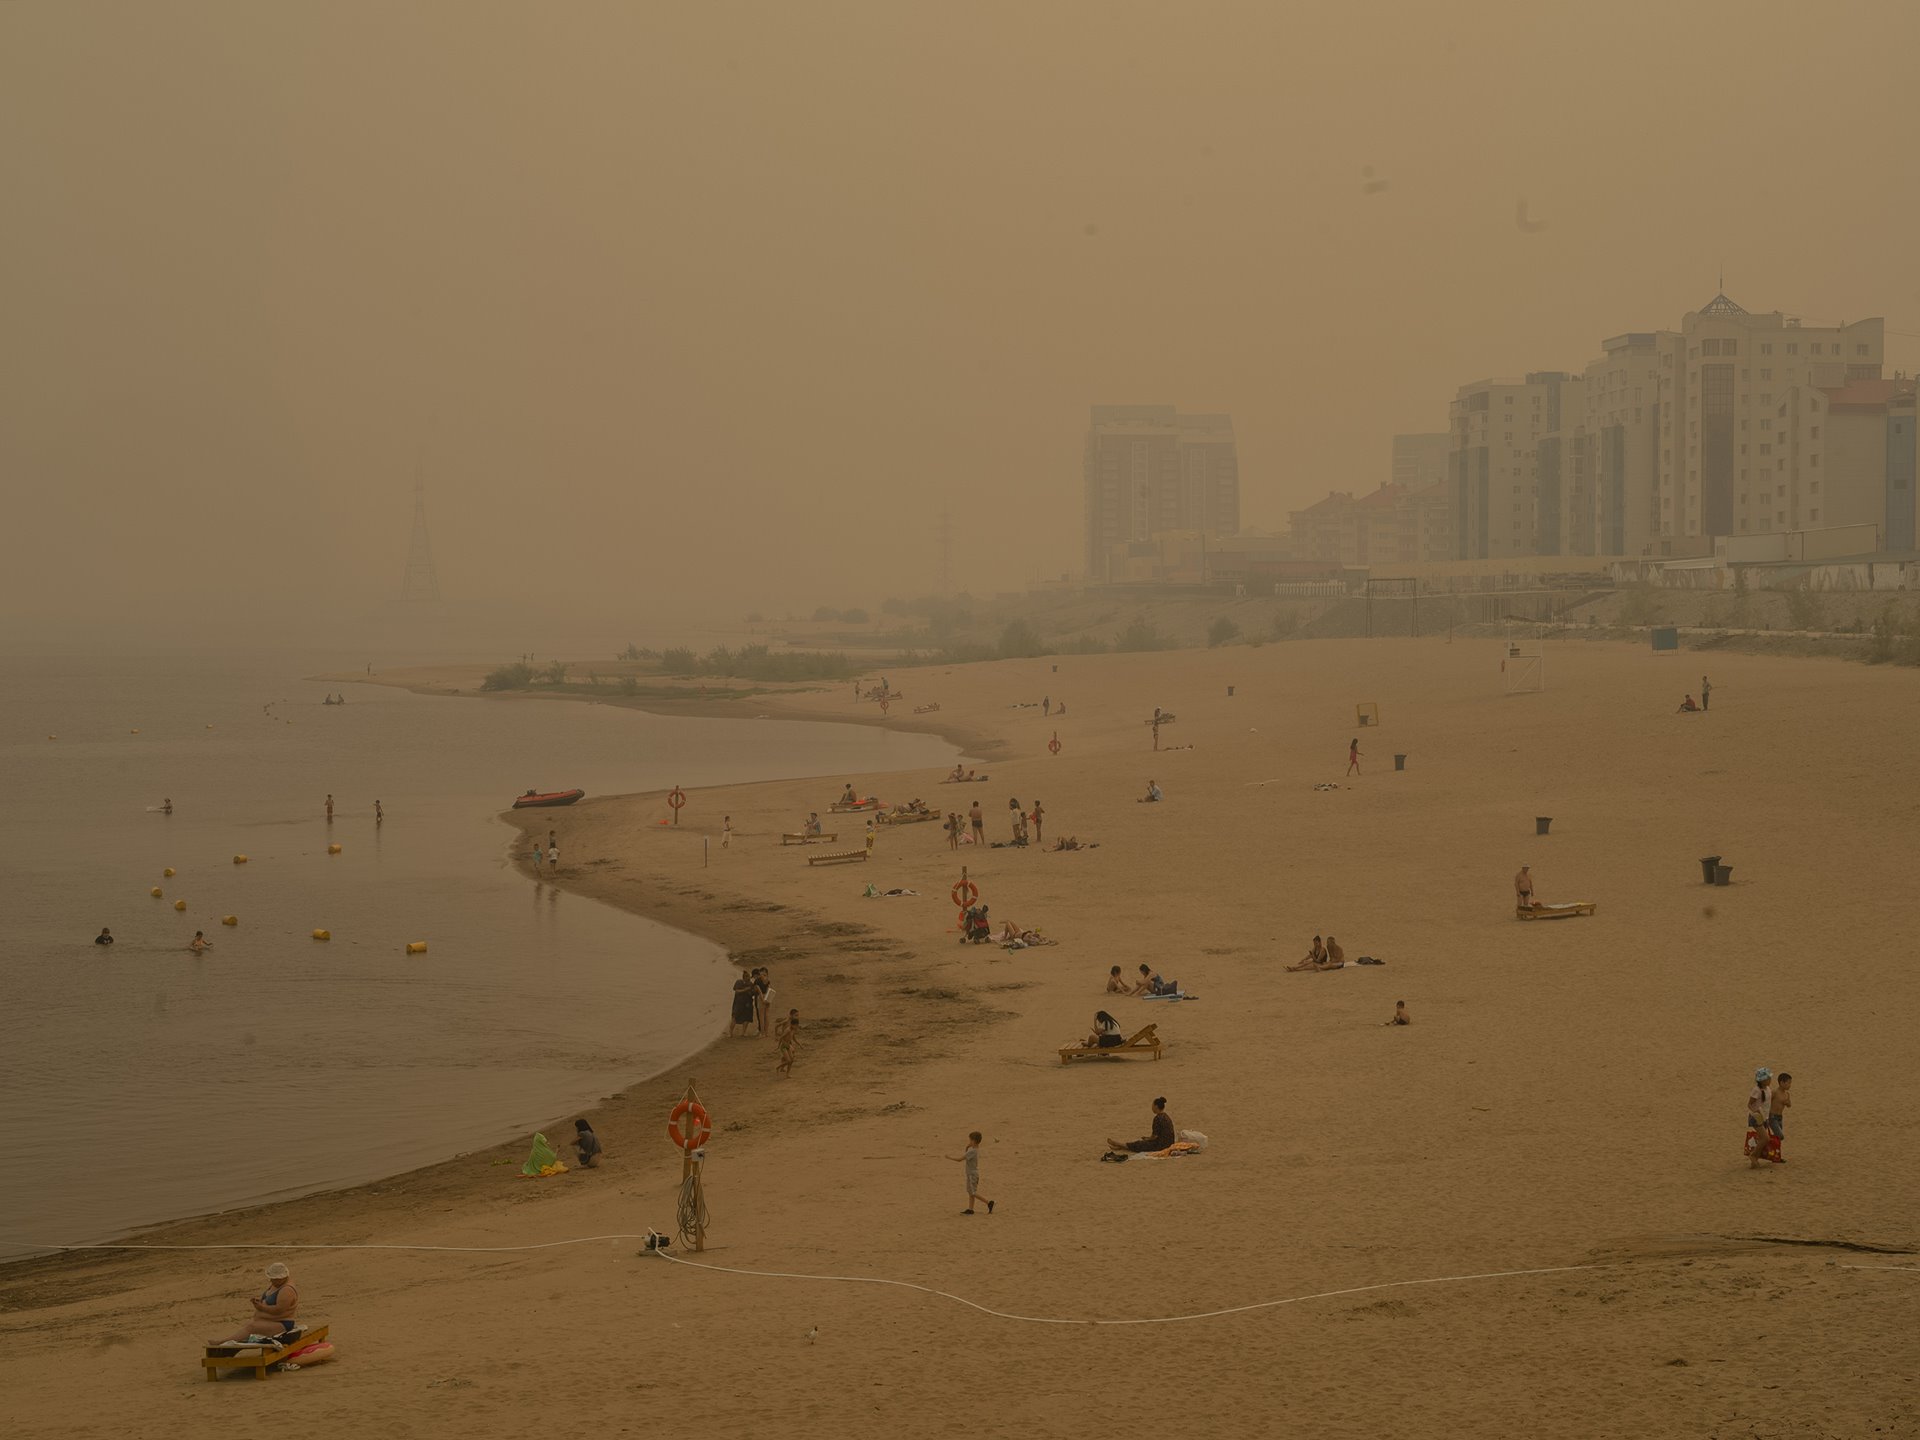 Despite a warning from local authorities for citizens to stay indoors to avoid choking fumes, some people in the capital Yakutsk passed time on the beach, Yakutsk, Sakha, Siberia, Russia.